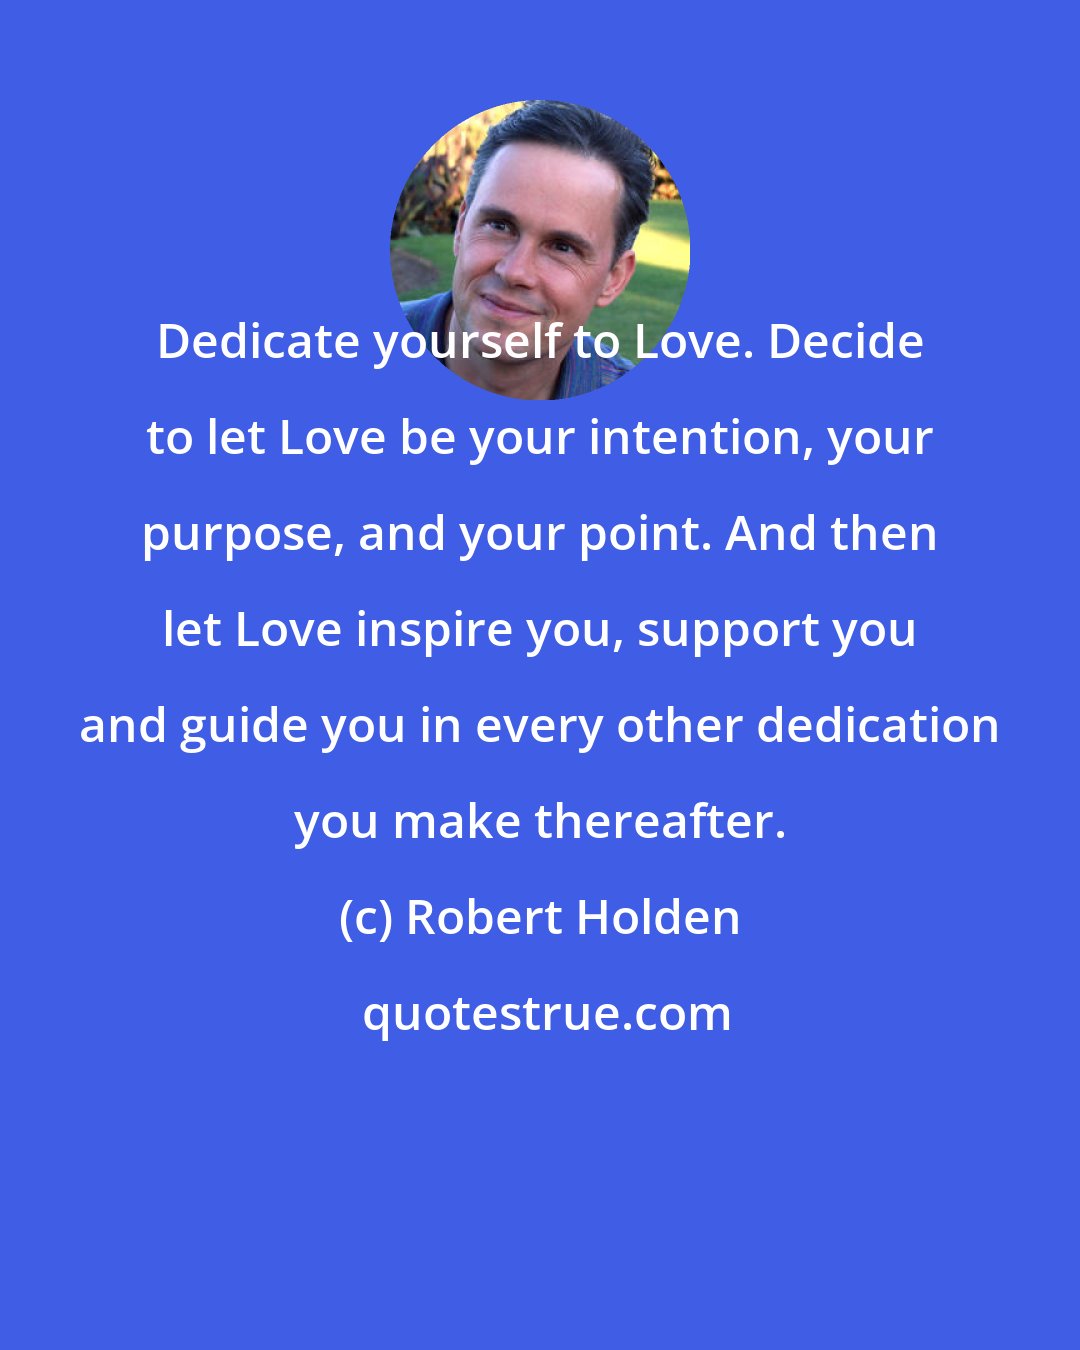 Robert Holden: Dedicate yourself to Love. Decide to let Love be your intention, your purpose, and your point. And then let Love inspire you, support you and guide you in every other dedication you make thereafter.